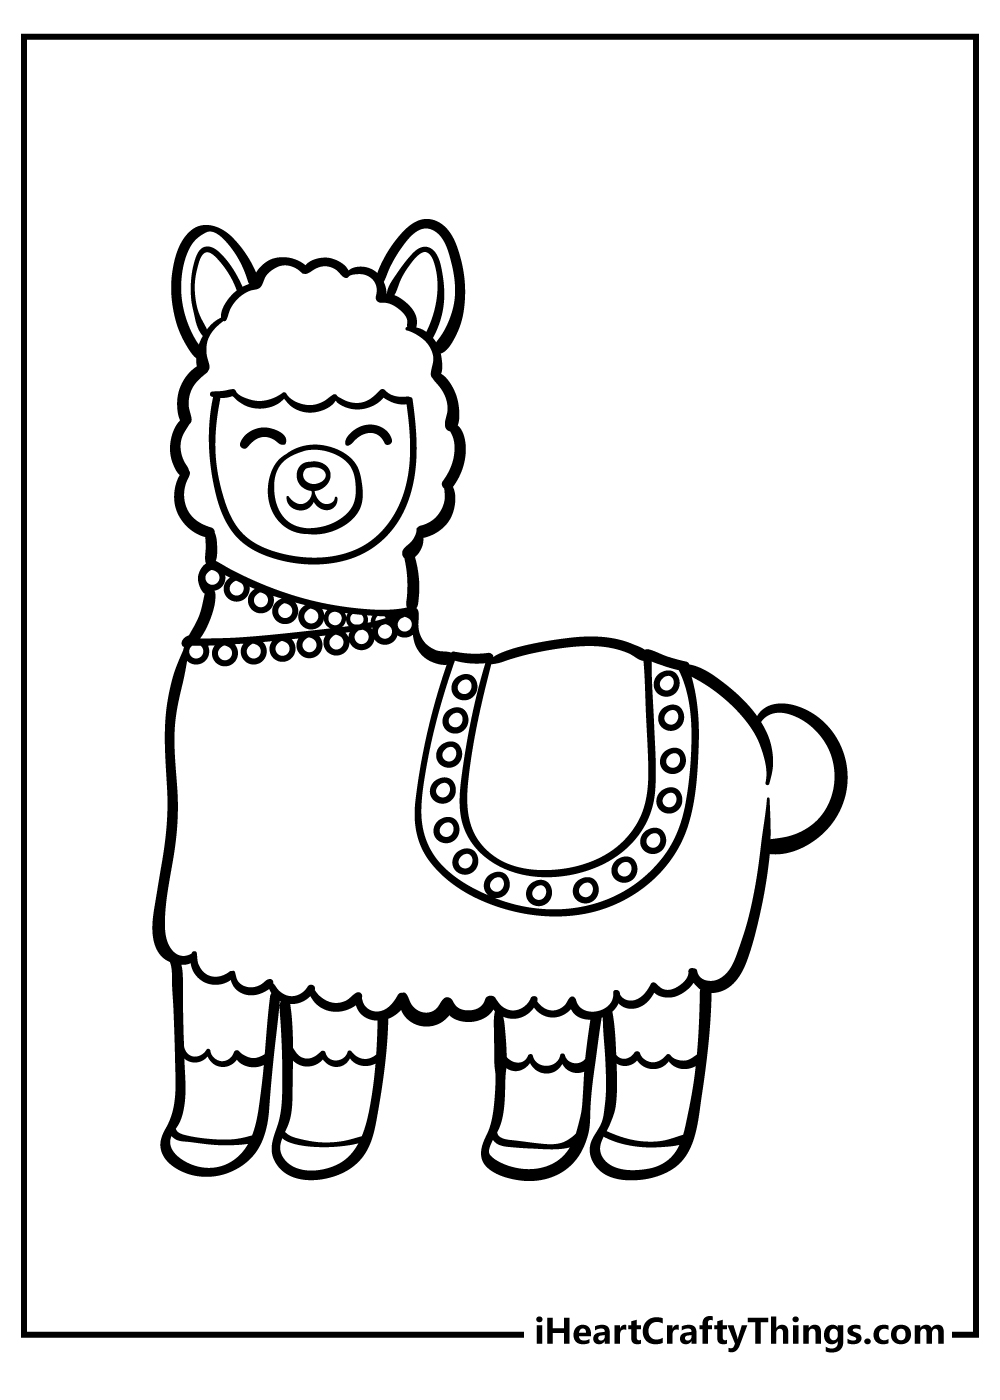 Printable Llama Coloring Pages Updated 20